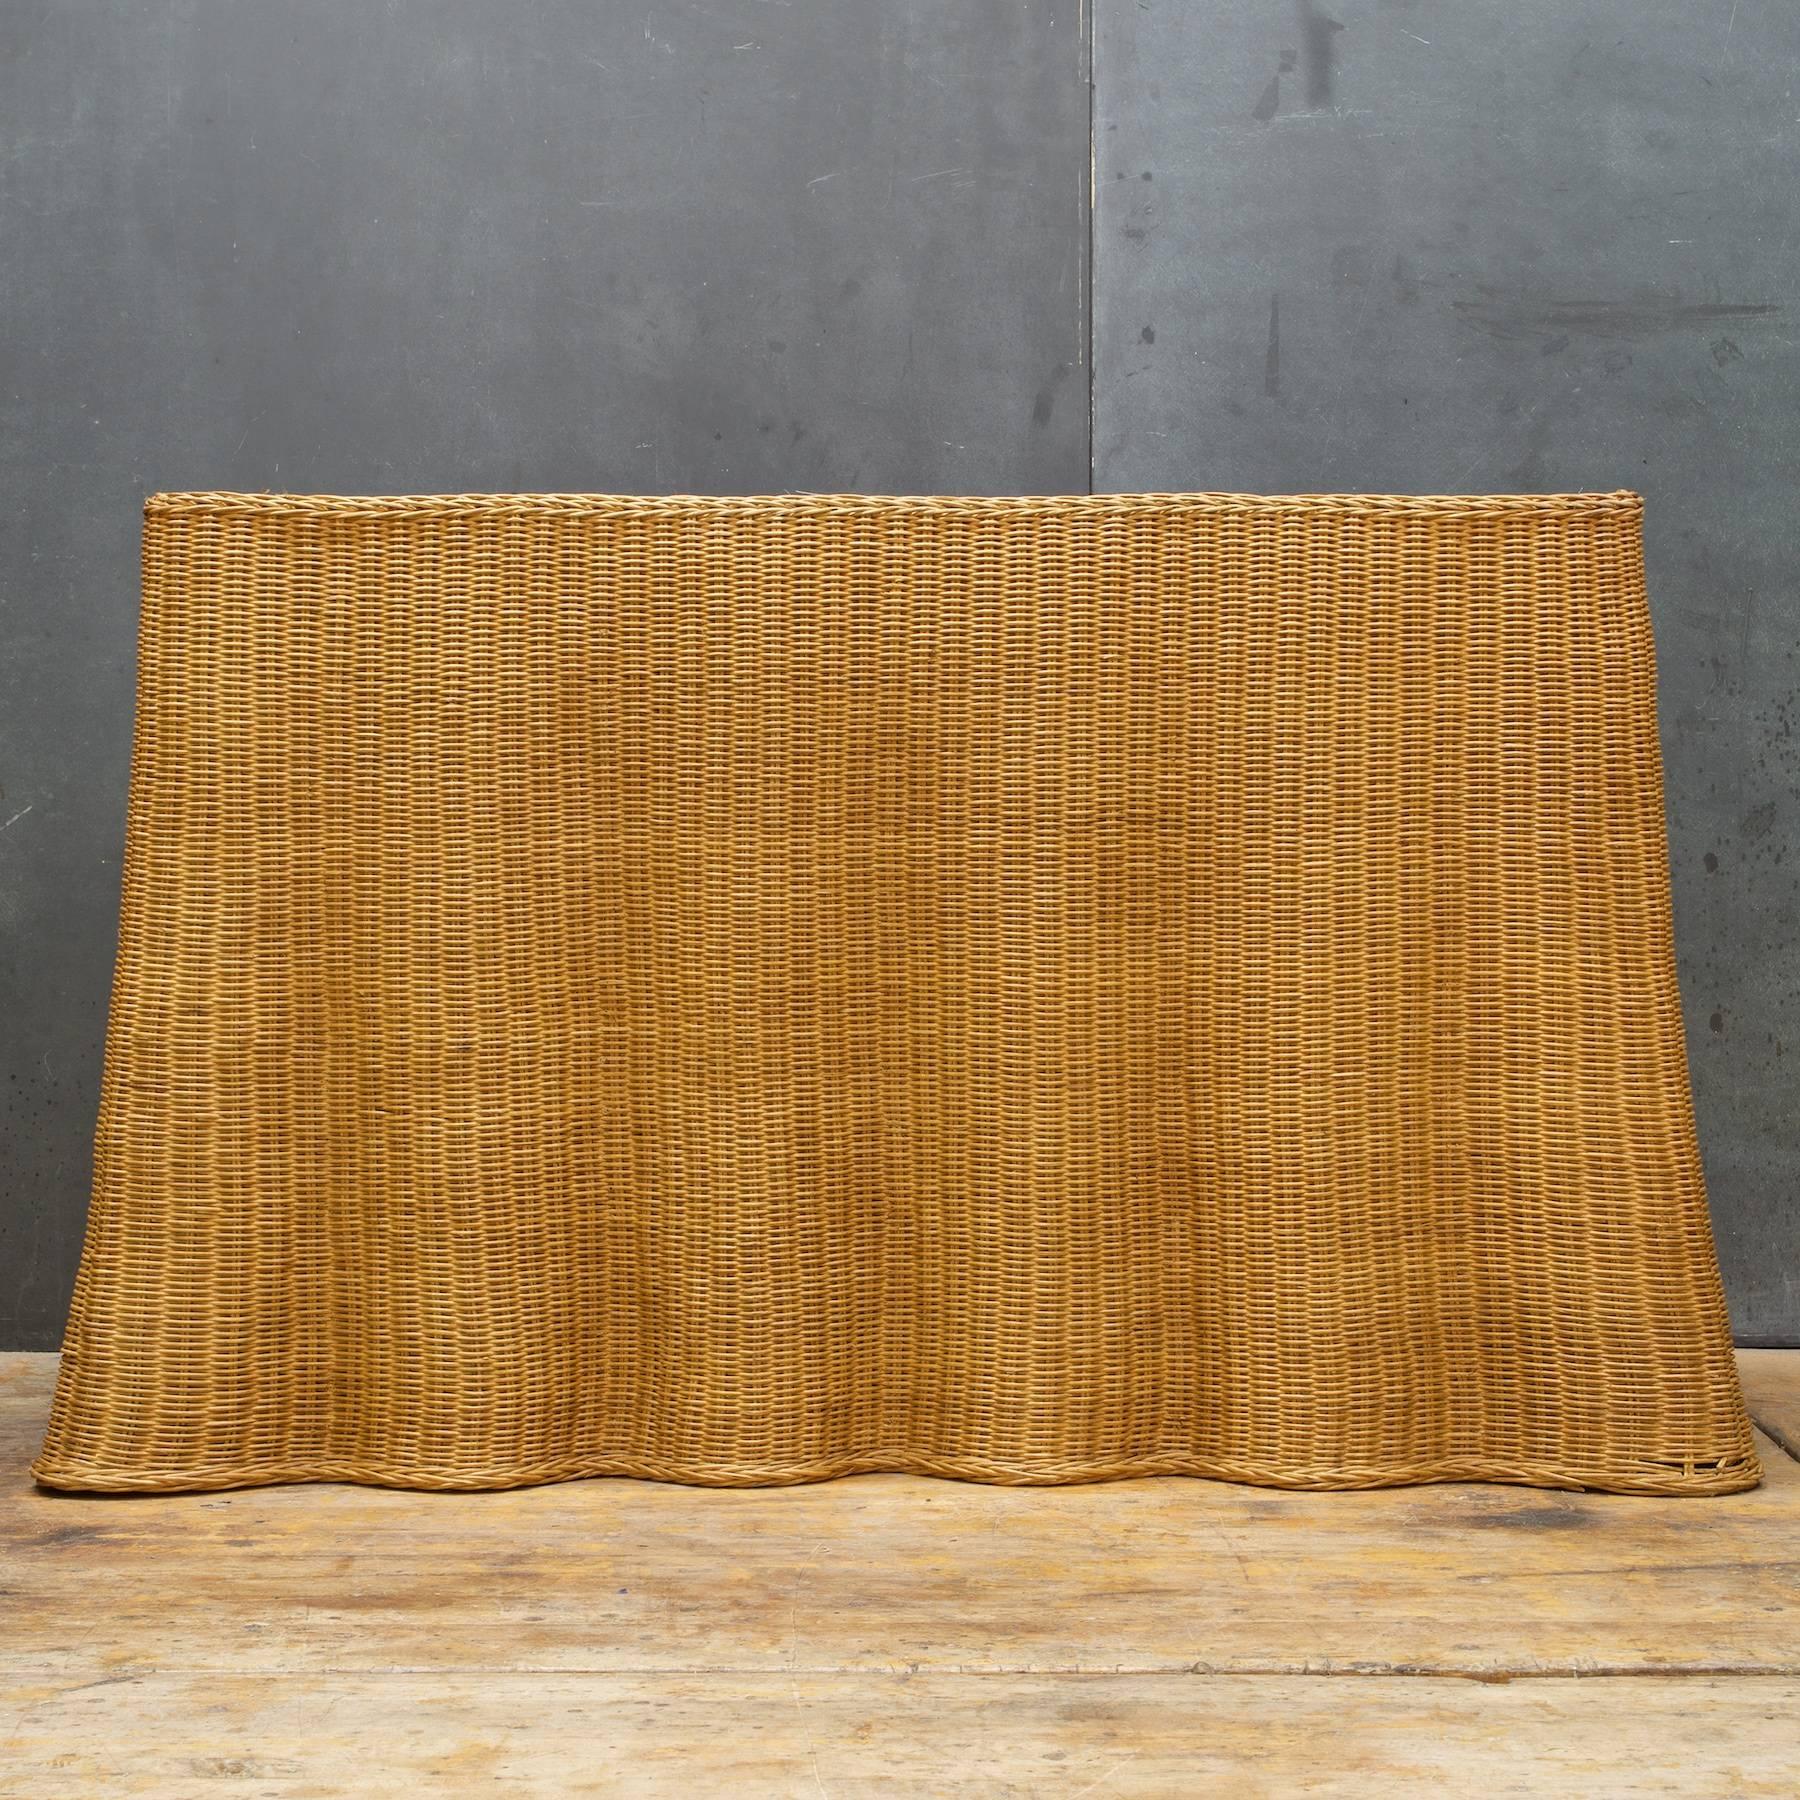 1970s sculptural handcrafted Trompe L'oeil rattan draped sheet (ghost) console table. Wicker in a wonderful draped form, amazing and quite rare. Fairly large in size, excellent for behind the sofa.

Measure: W 53 × D 19 × H 30 in. (Top W 45.5 x D